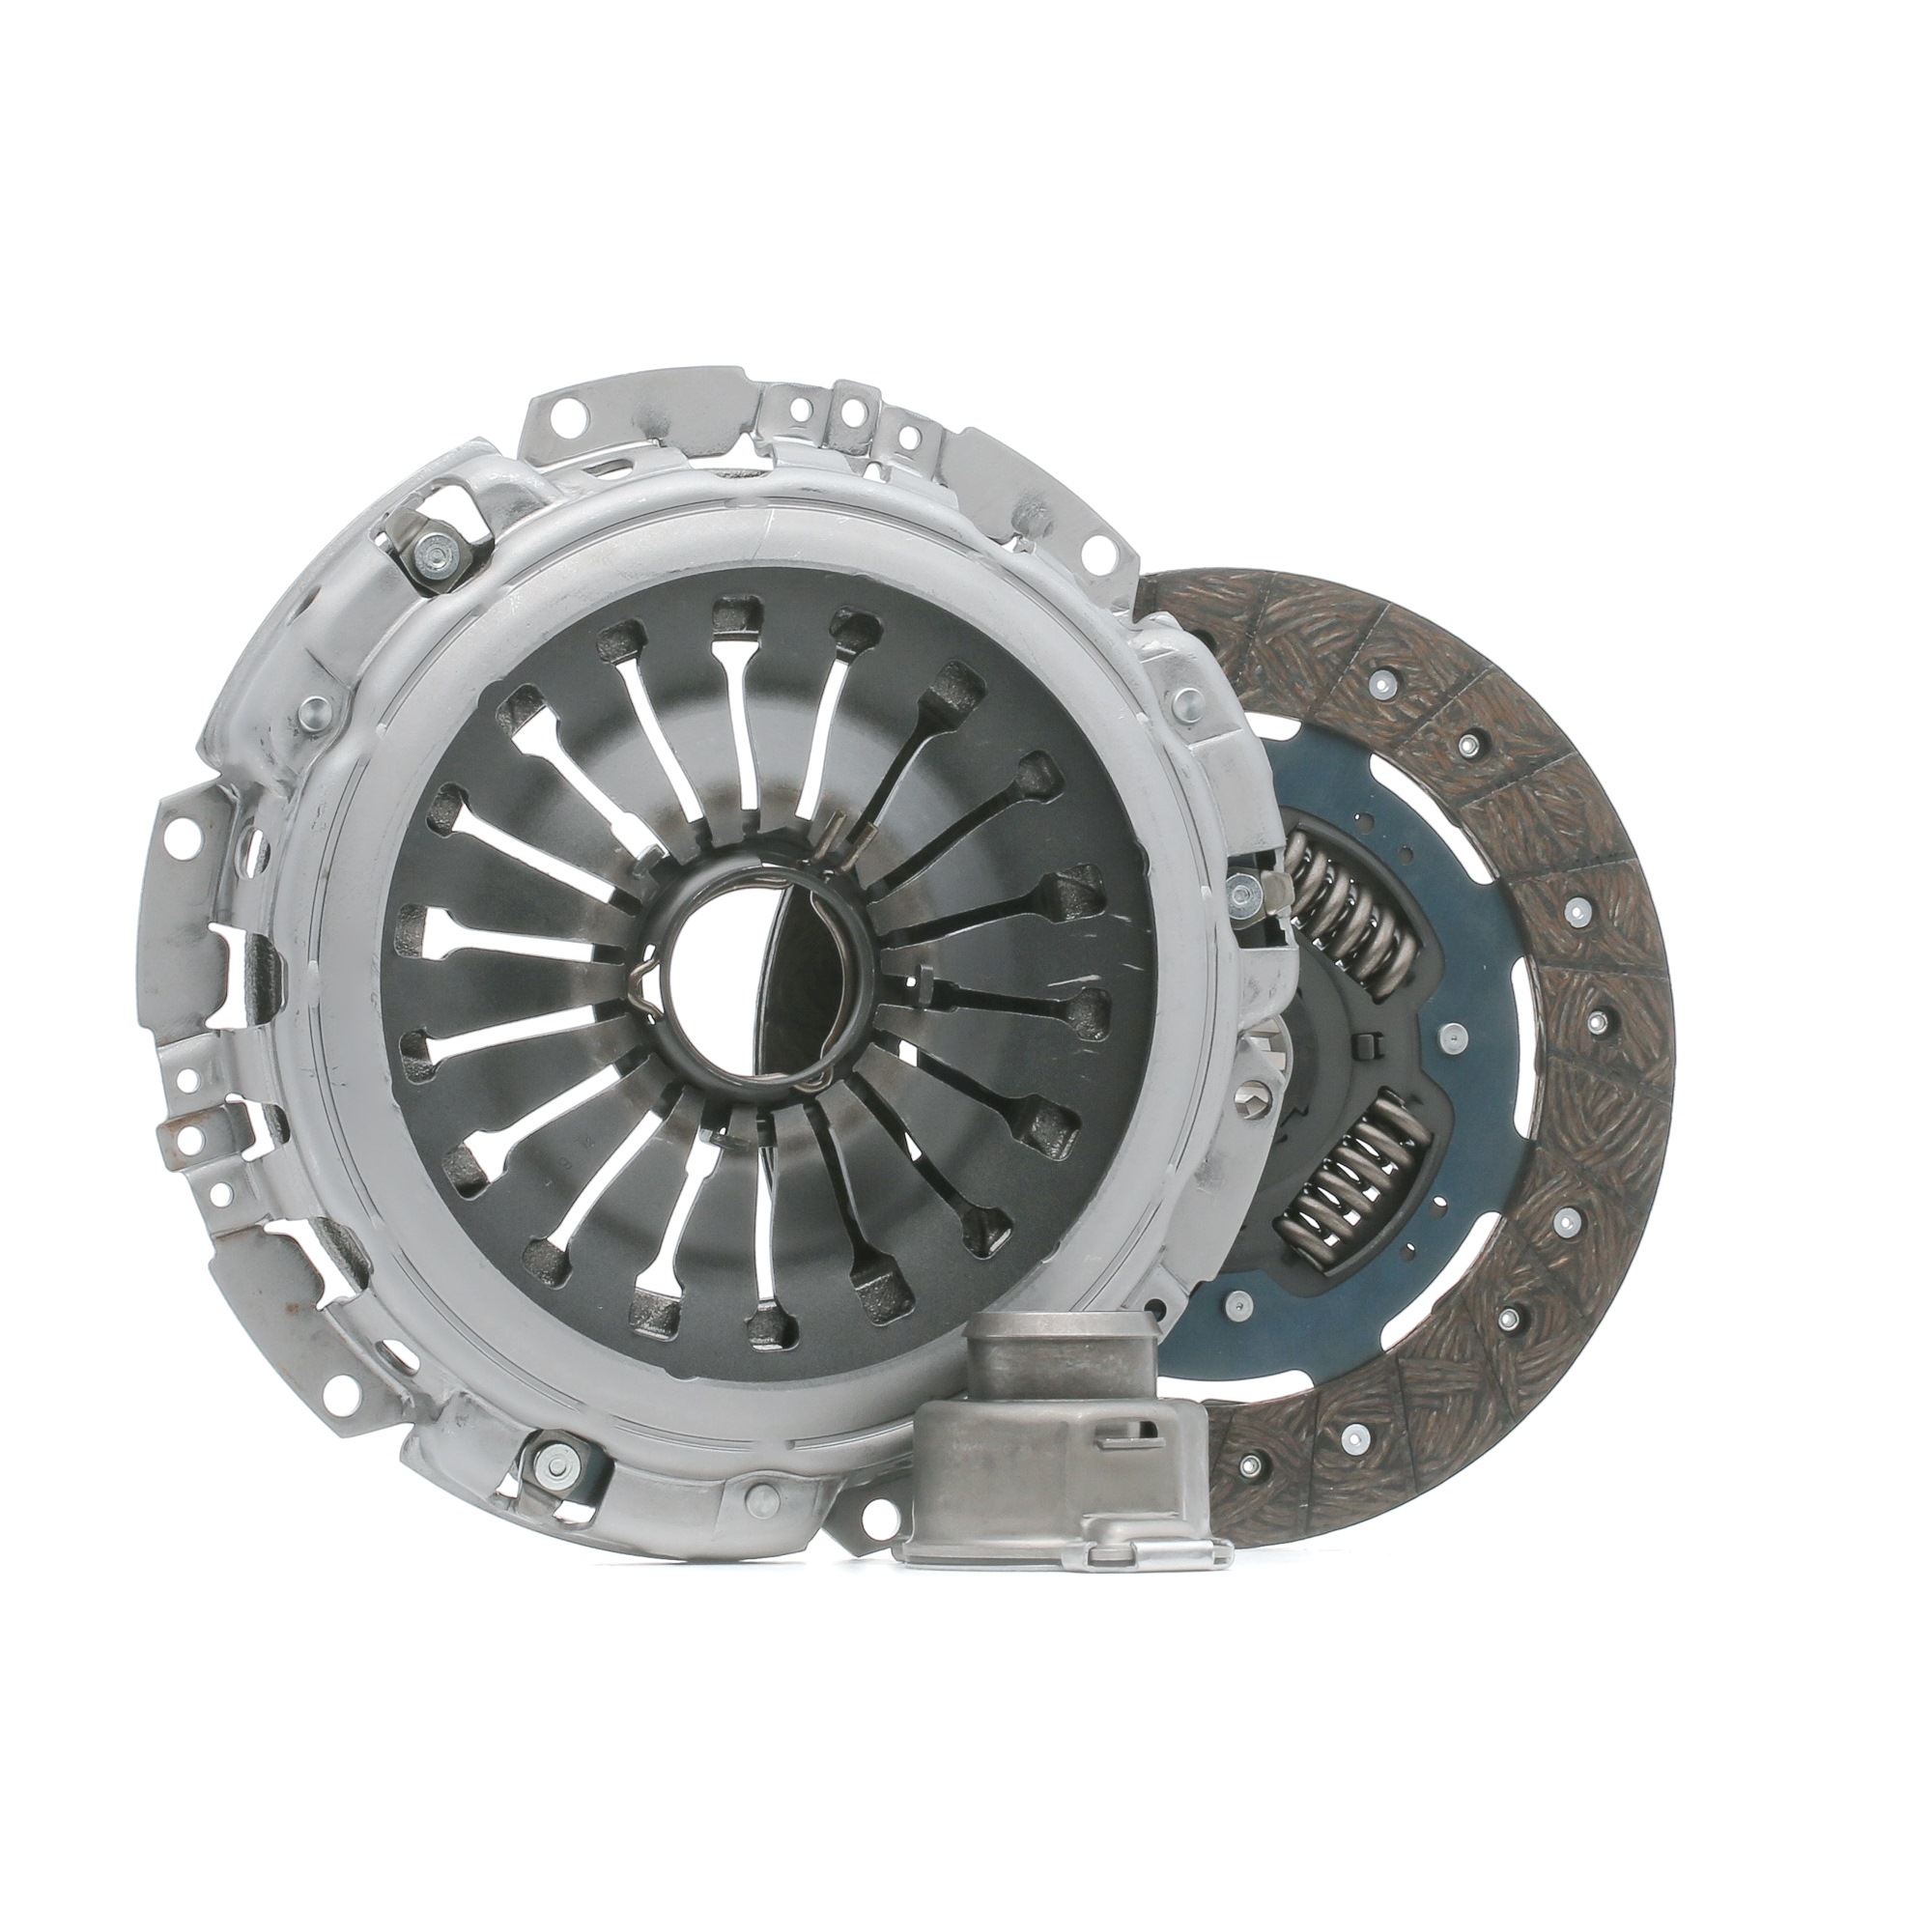 STARK SKCK-0100332 Clutch kit three-piece, with clutch pressure plate, with clutch disc, with bearing(s), 240mm